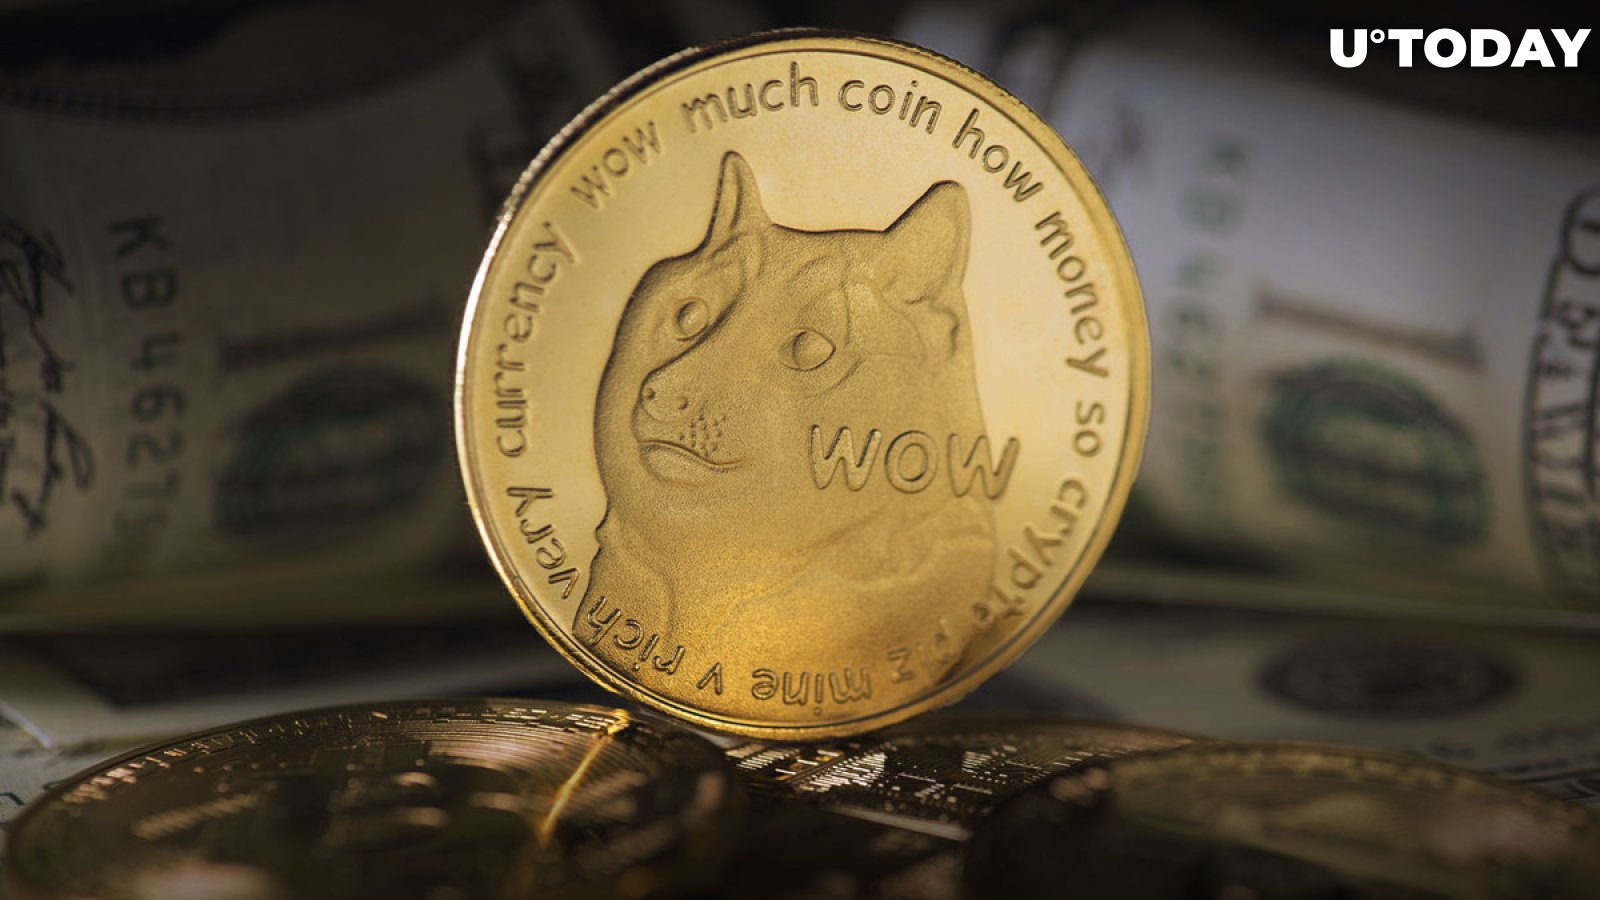 Dogecoin Creator: I Made $90 Billion Cryptocurrency in Few Hours